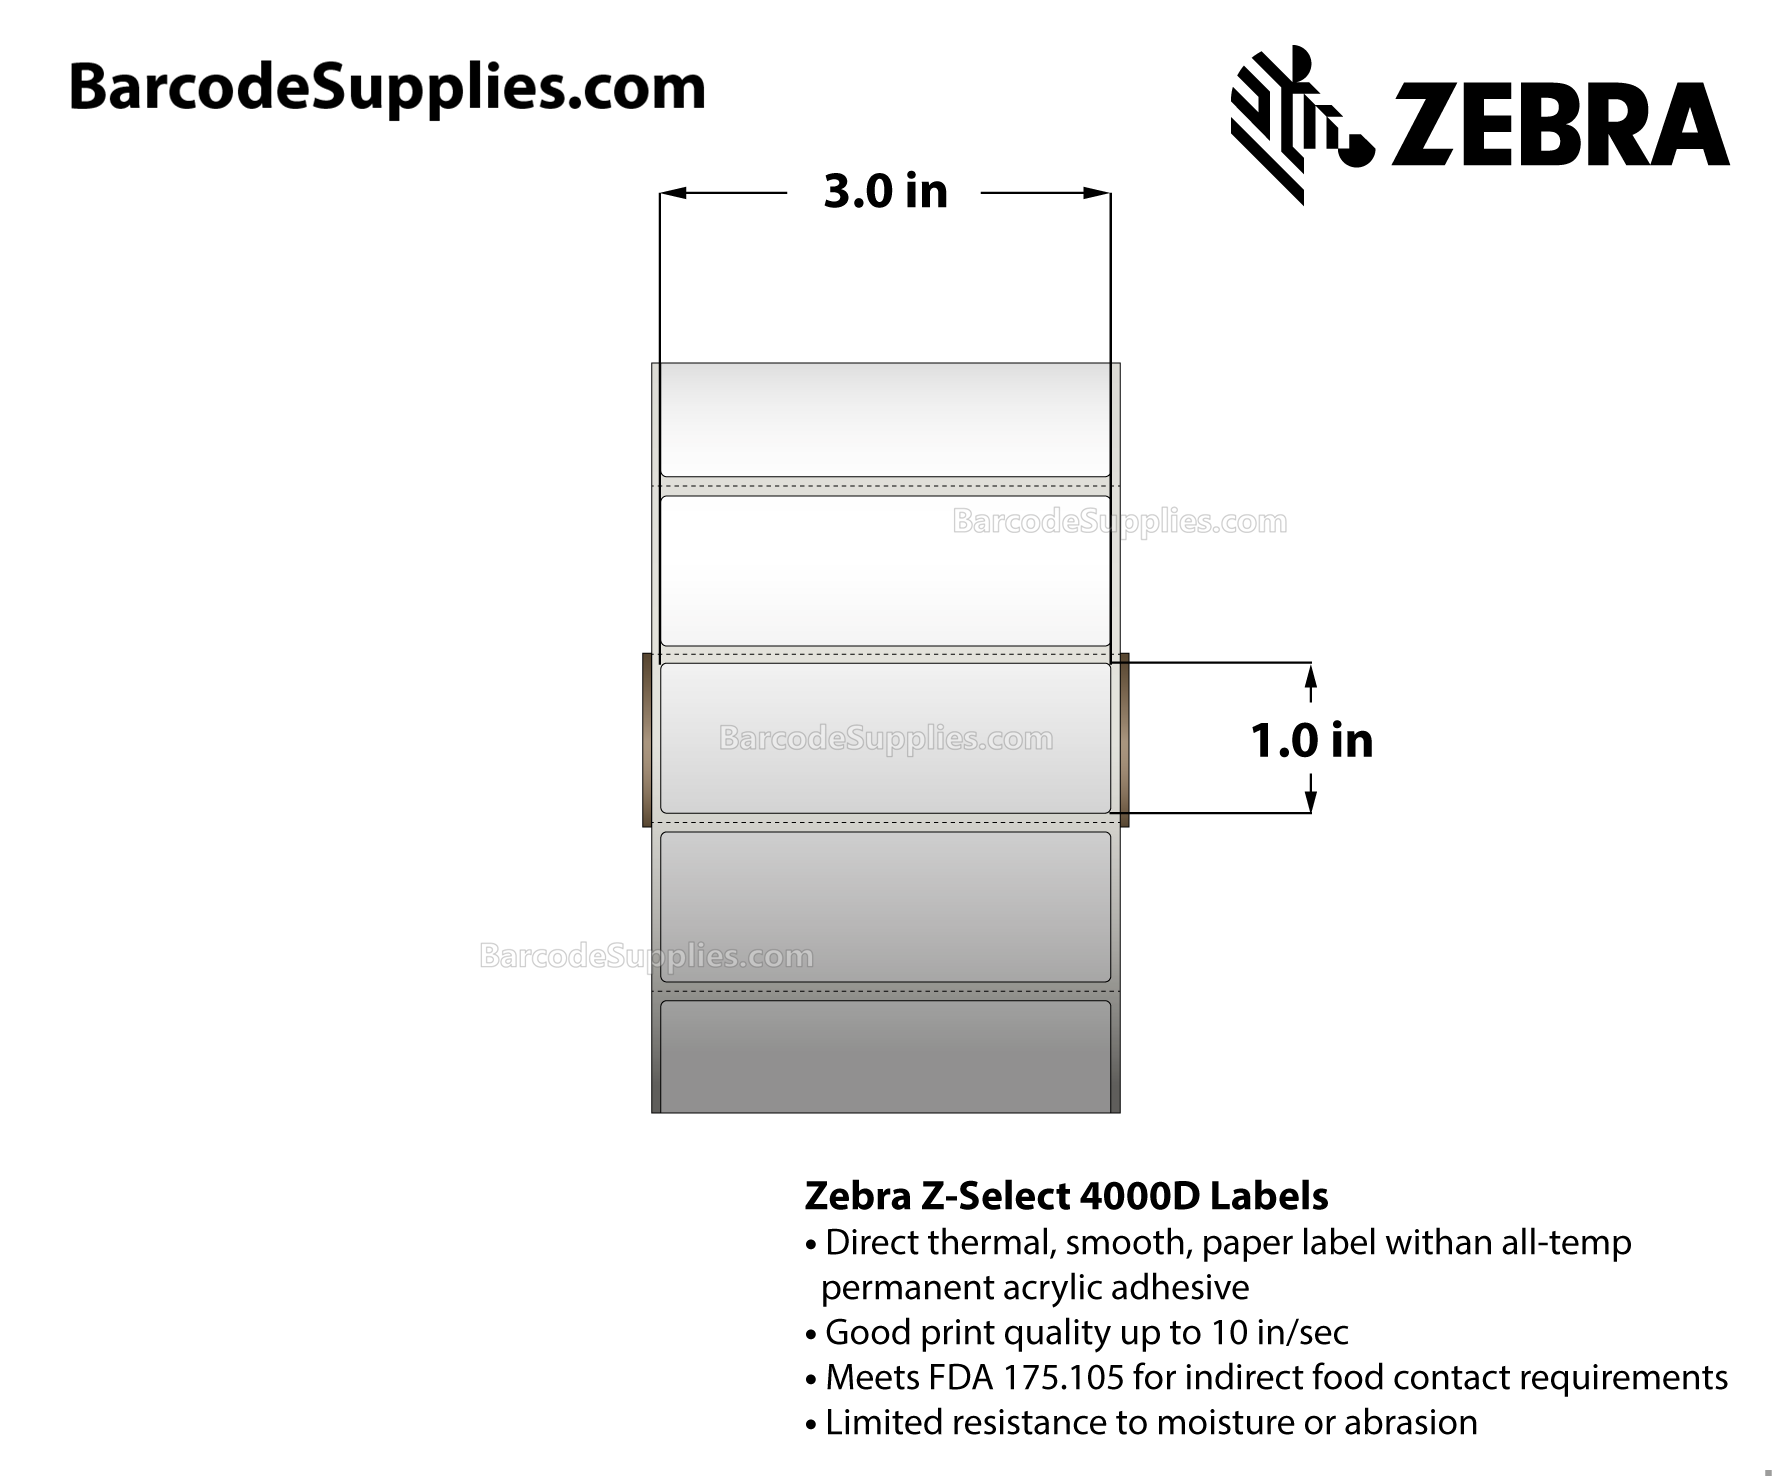 3 x 1 Direct Thermal White Z-Select 4000D Labels With All-Temp Adhesive - Perforated - 2340 Labels Per Roll - Carton Of 6 Rolls - 14040 Labels Total - MPN: 10010043